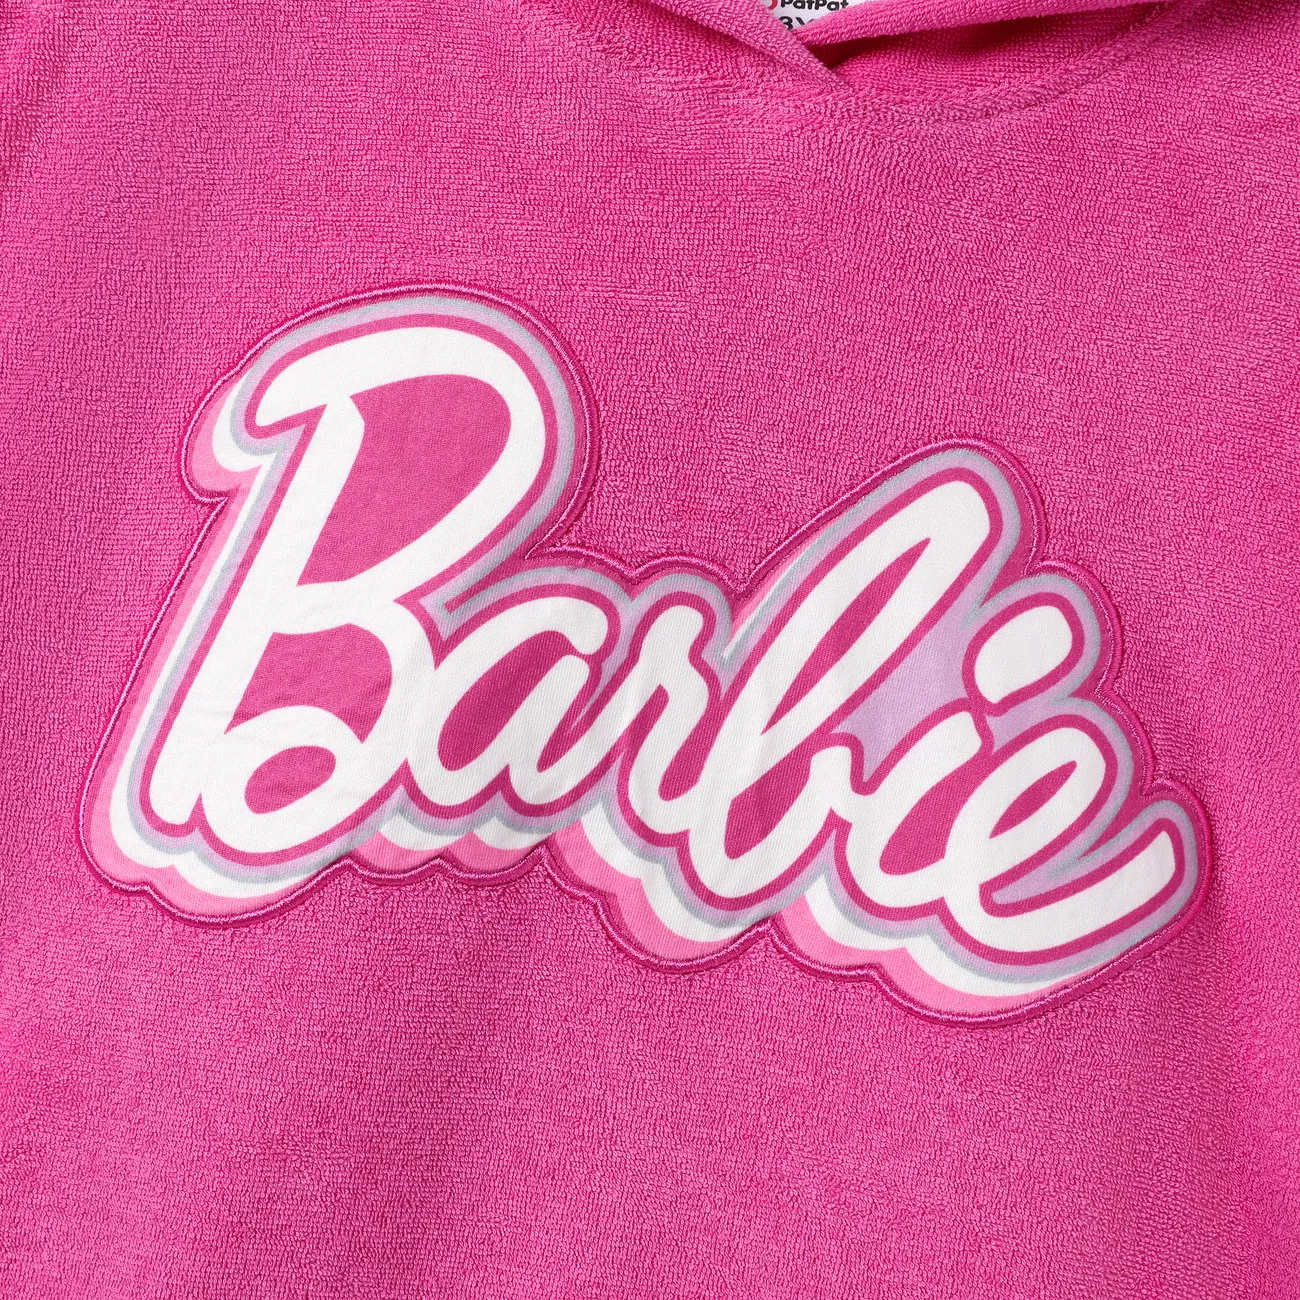 Barbie Toddler/Kids Girls 1pc Cotton Classic Logo Print Hooded Towel/Swimsuit Coverup  Roseo big image 1